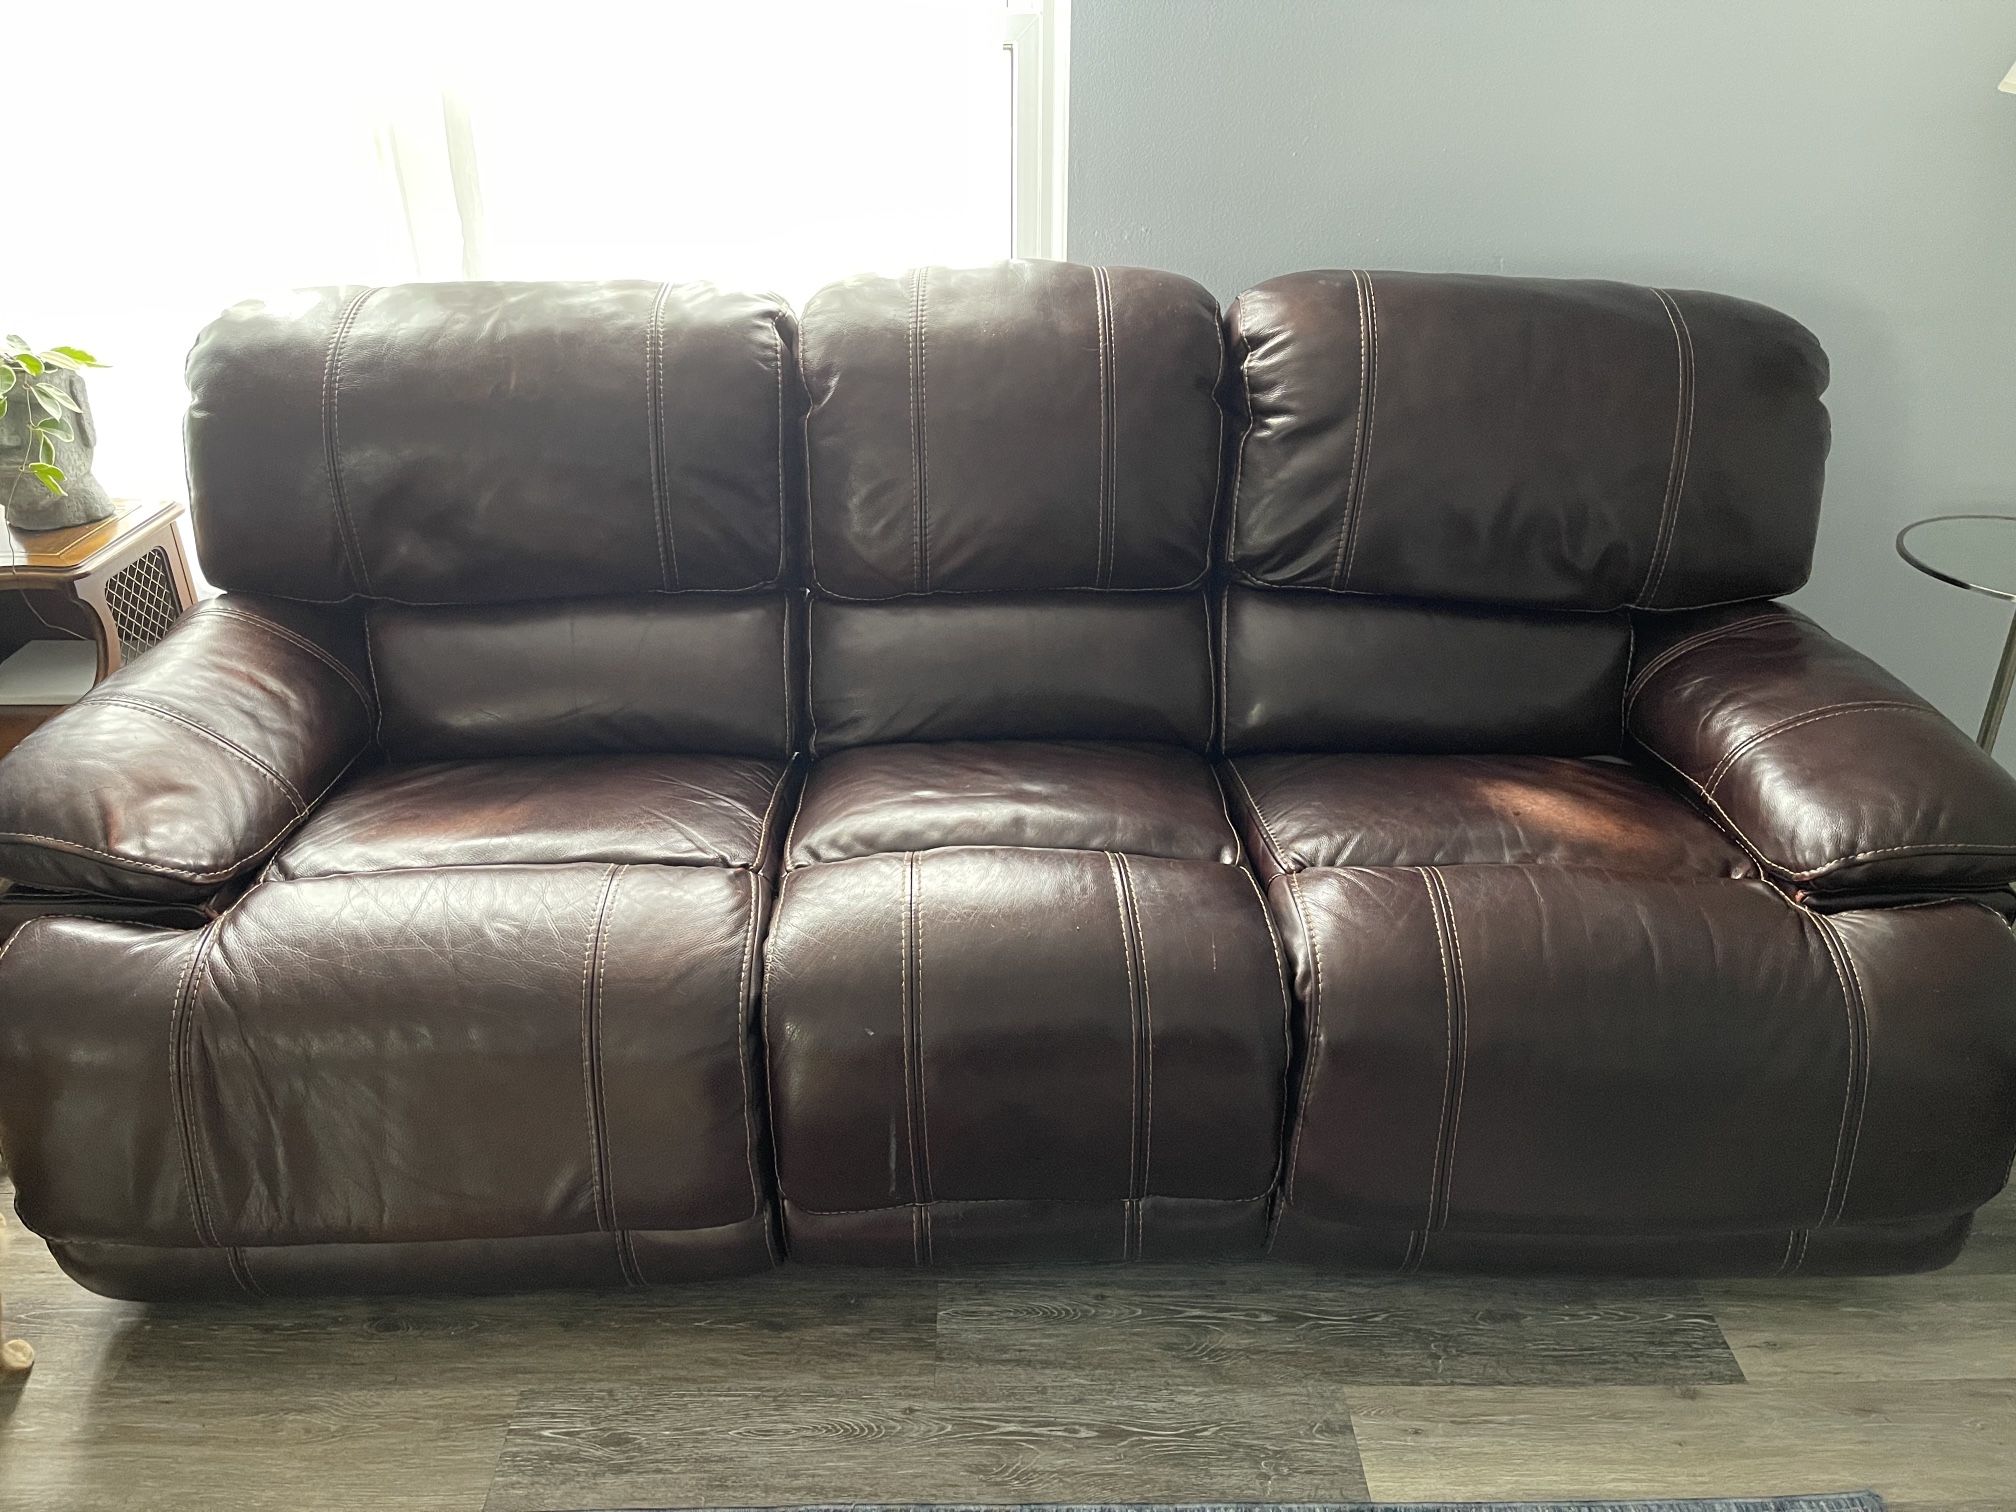 Lazy boy couch and recliner